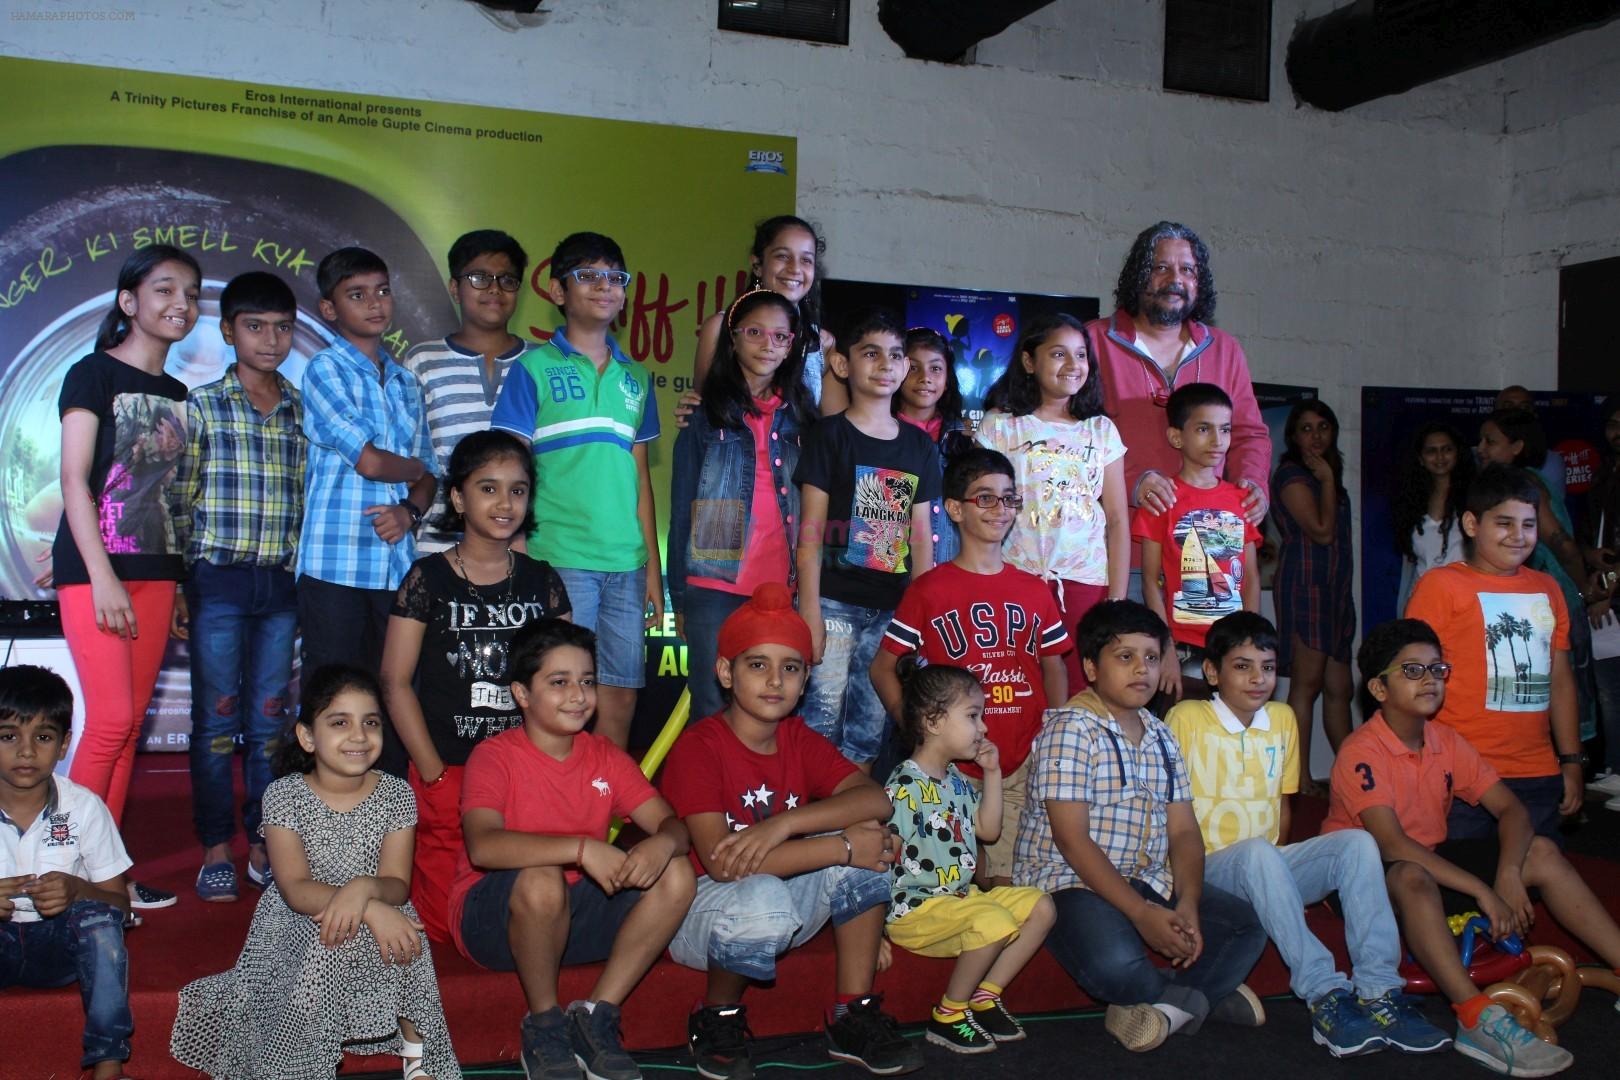 Amole Gupte at the Launch of Naak Song Of Film Sniff on 4th Aug 2017